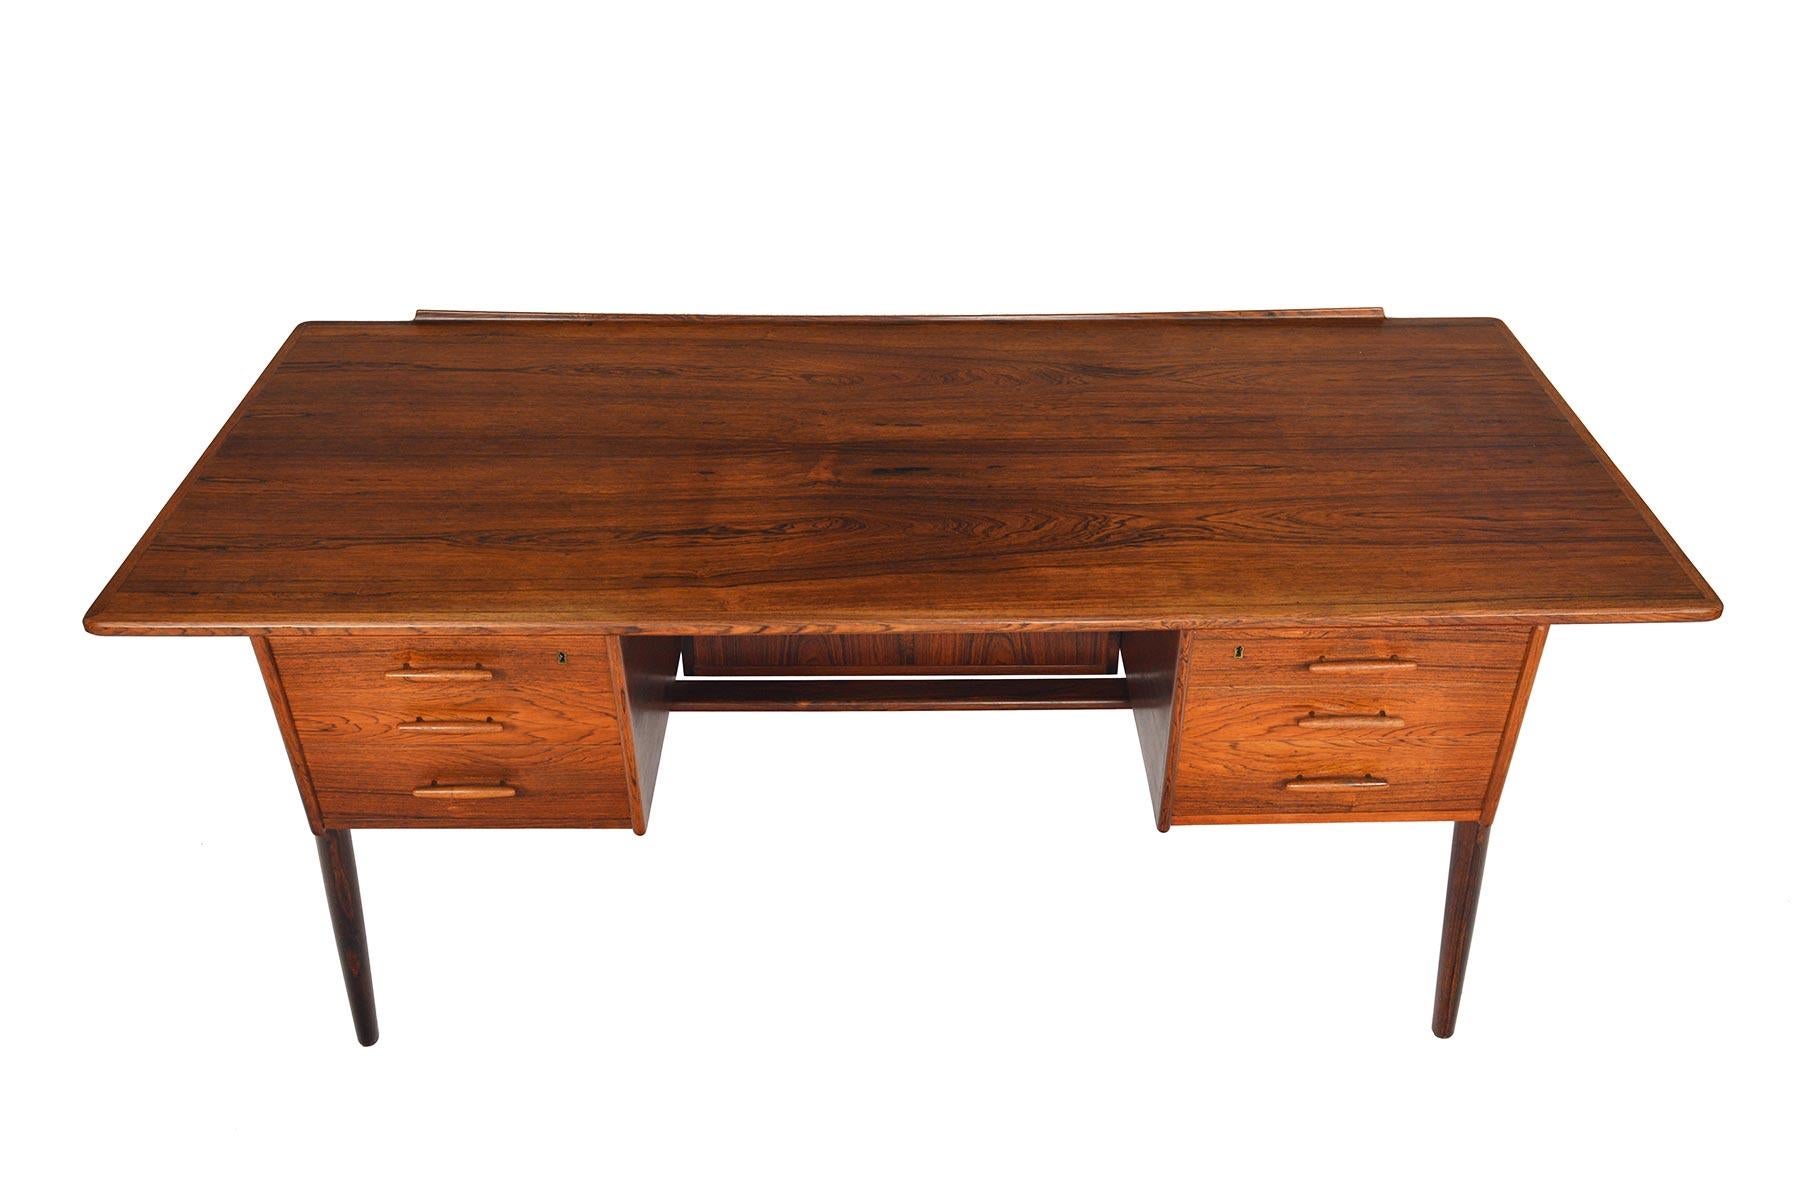 This original Danish modern executive desk crafted in Brazilian rosewood is outfitted with all the bells and whistles of show-stopping midcentury desk. Every element of this piece features unique considerations and expert craftsmanship. Sculpted